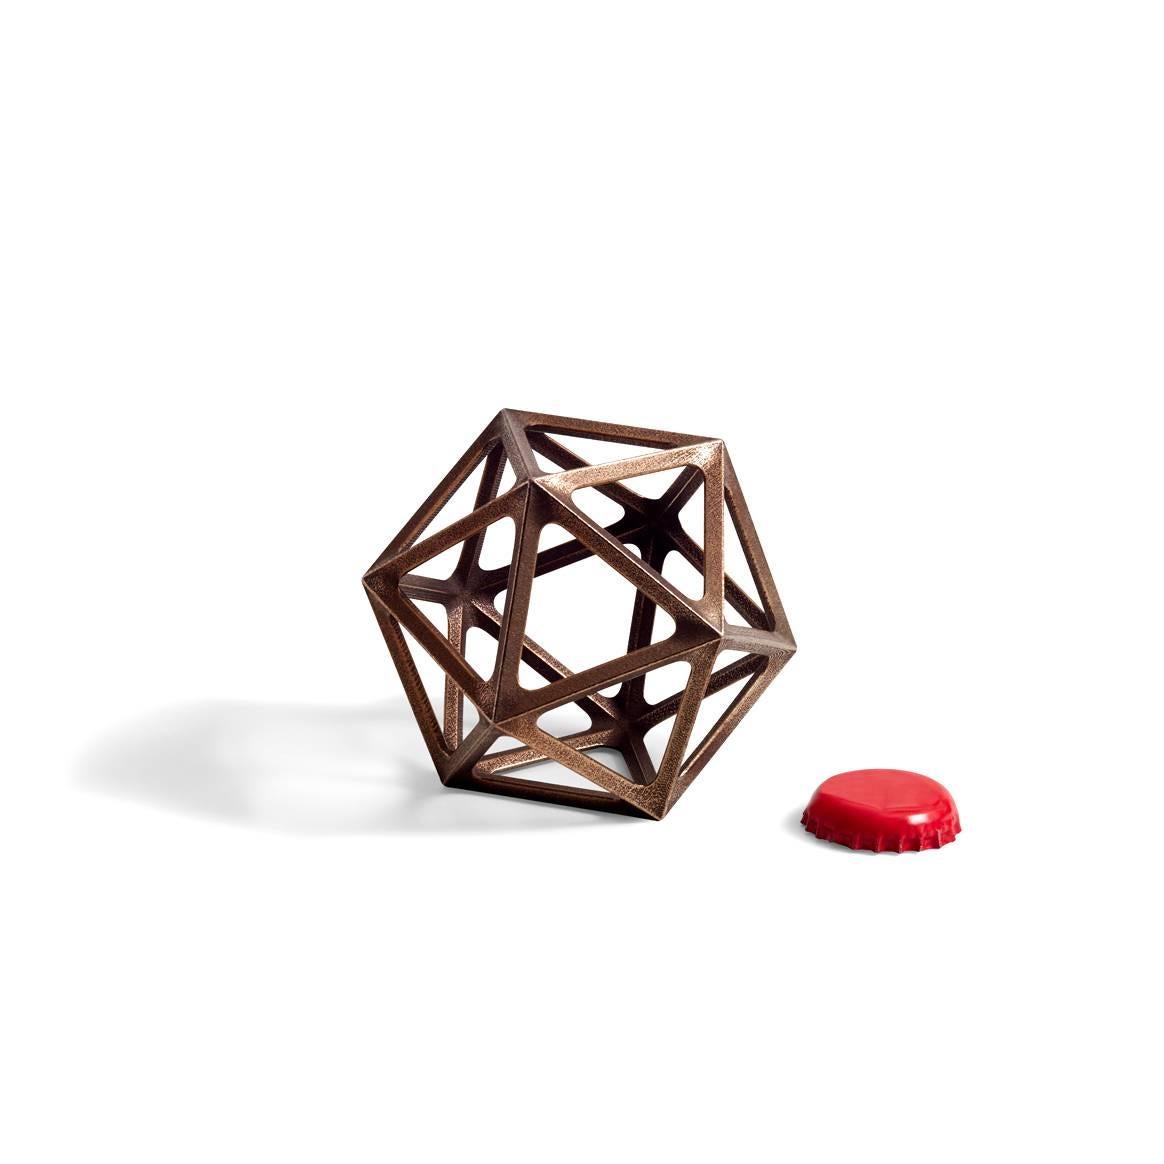 Pioneering the possibilities of functional metal frameworks, Fort Standard created a beautiful tabletop item that begs to be used and displayed. The complex design also showcases the full potential of 3D printed bronze. Simply put, the 3D printed